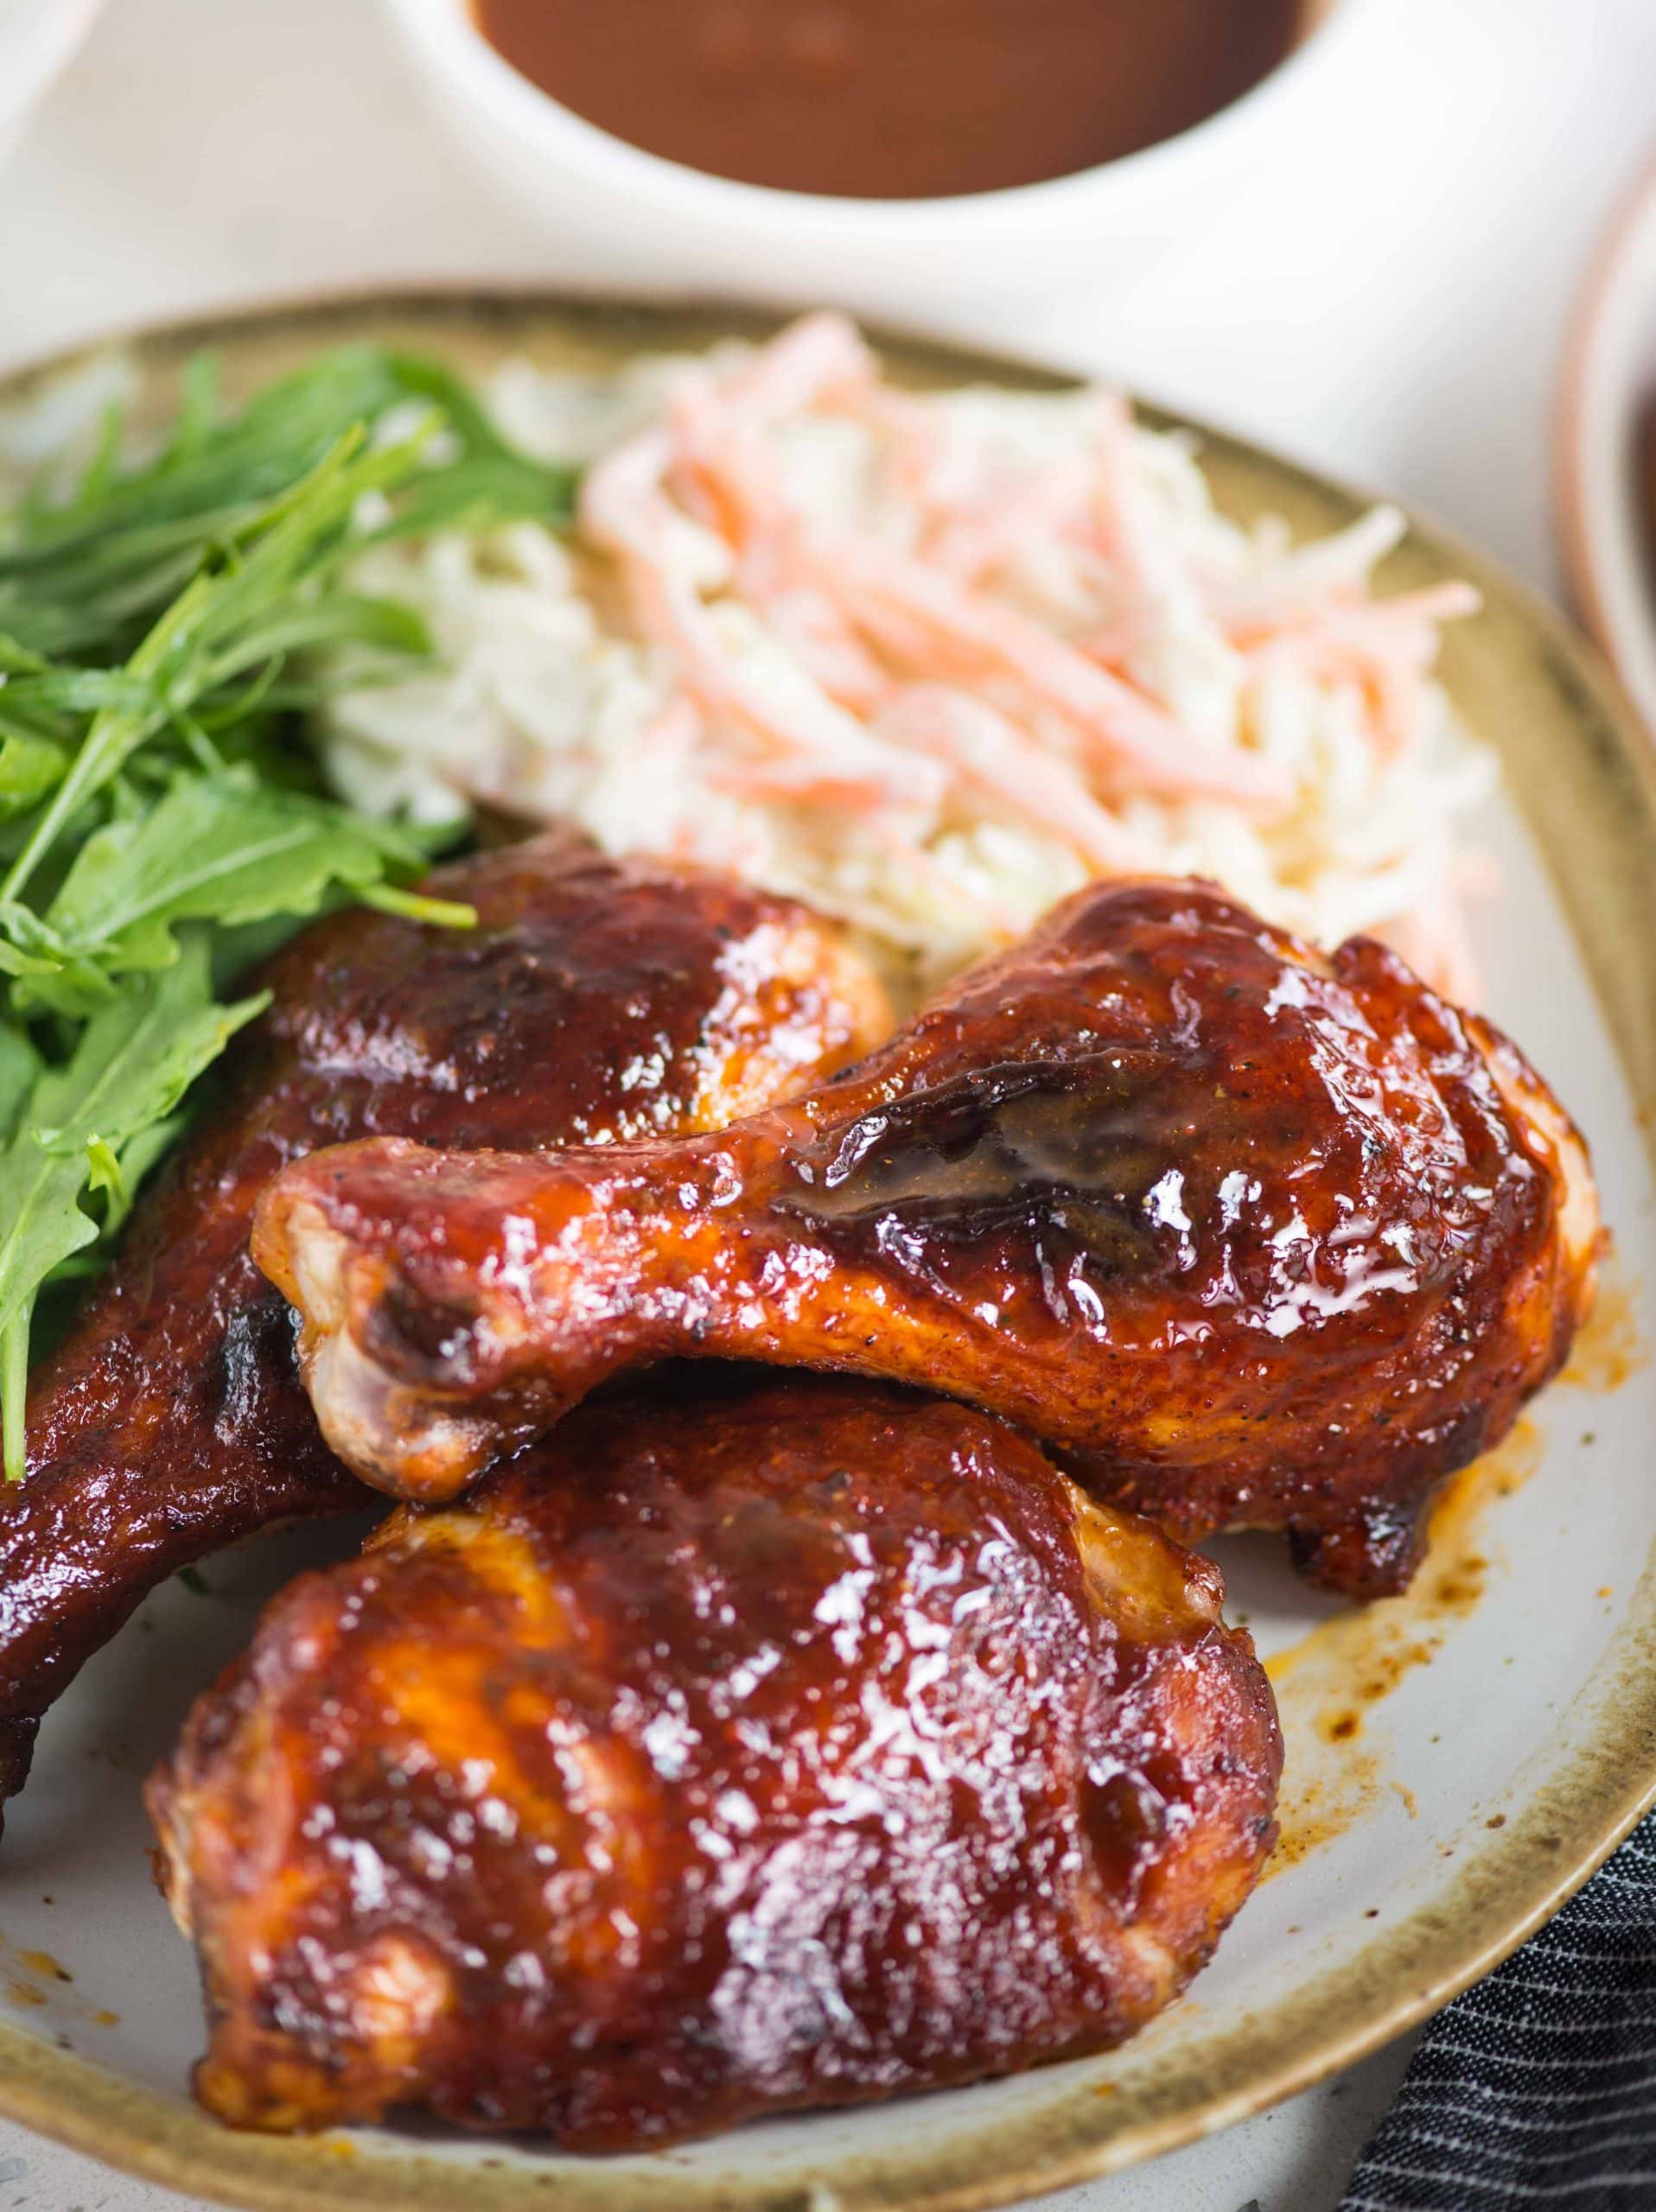 Marinated Moist Oven Baked Barbeque Chicken